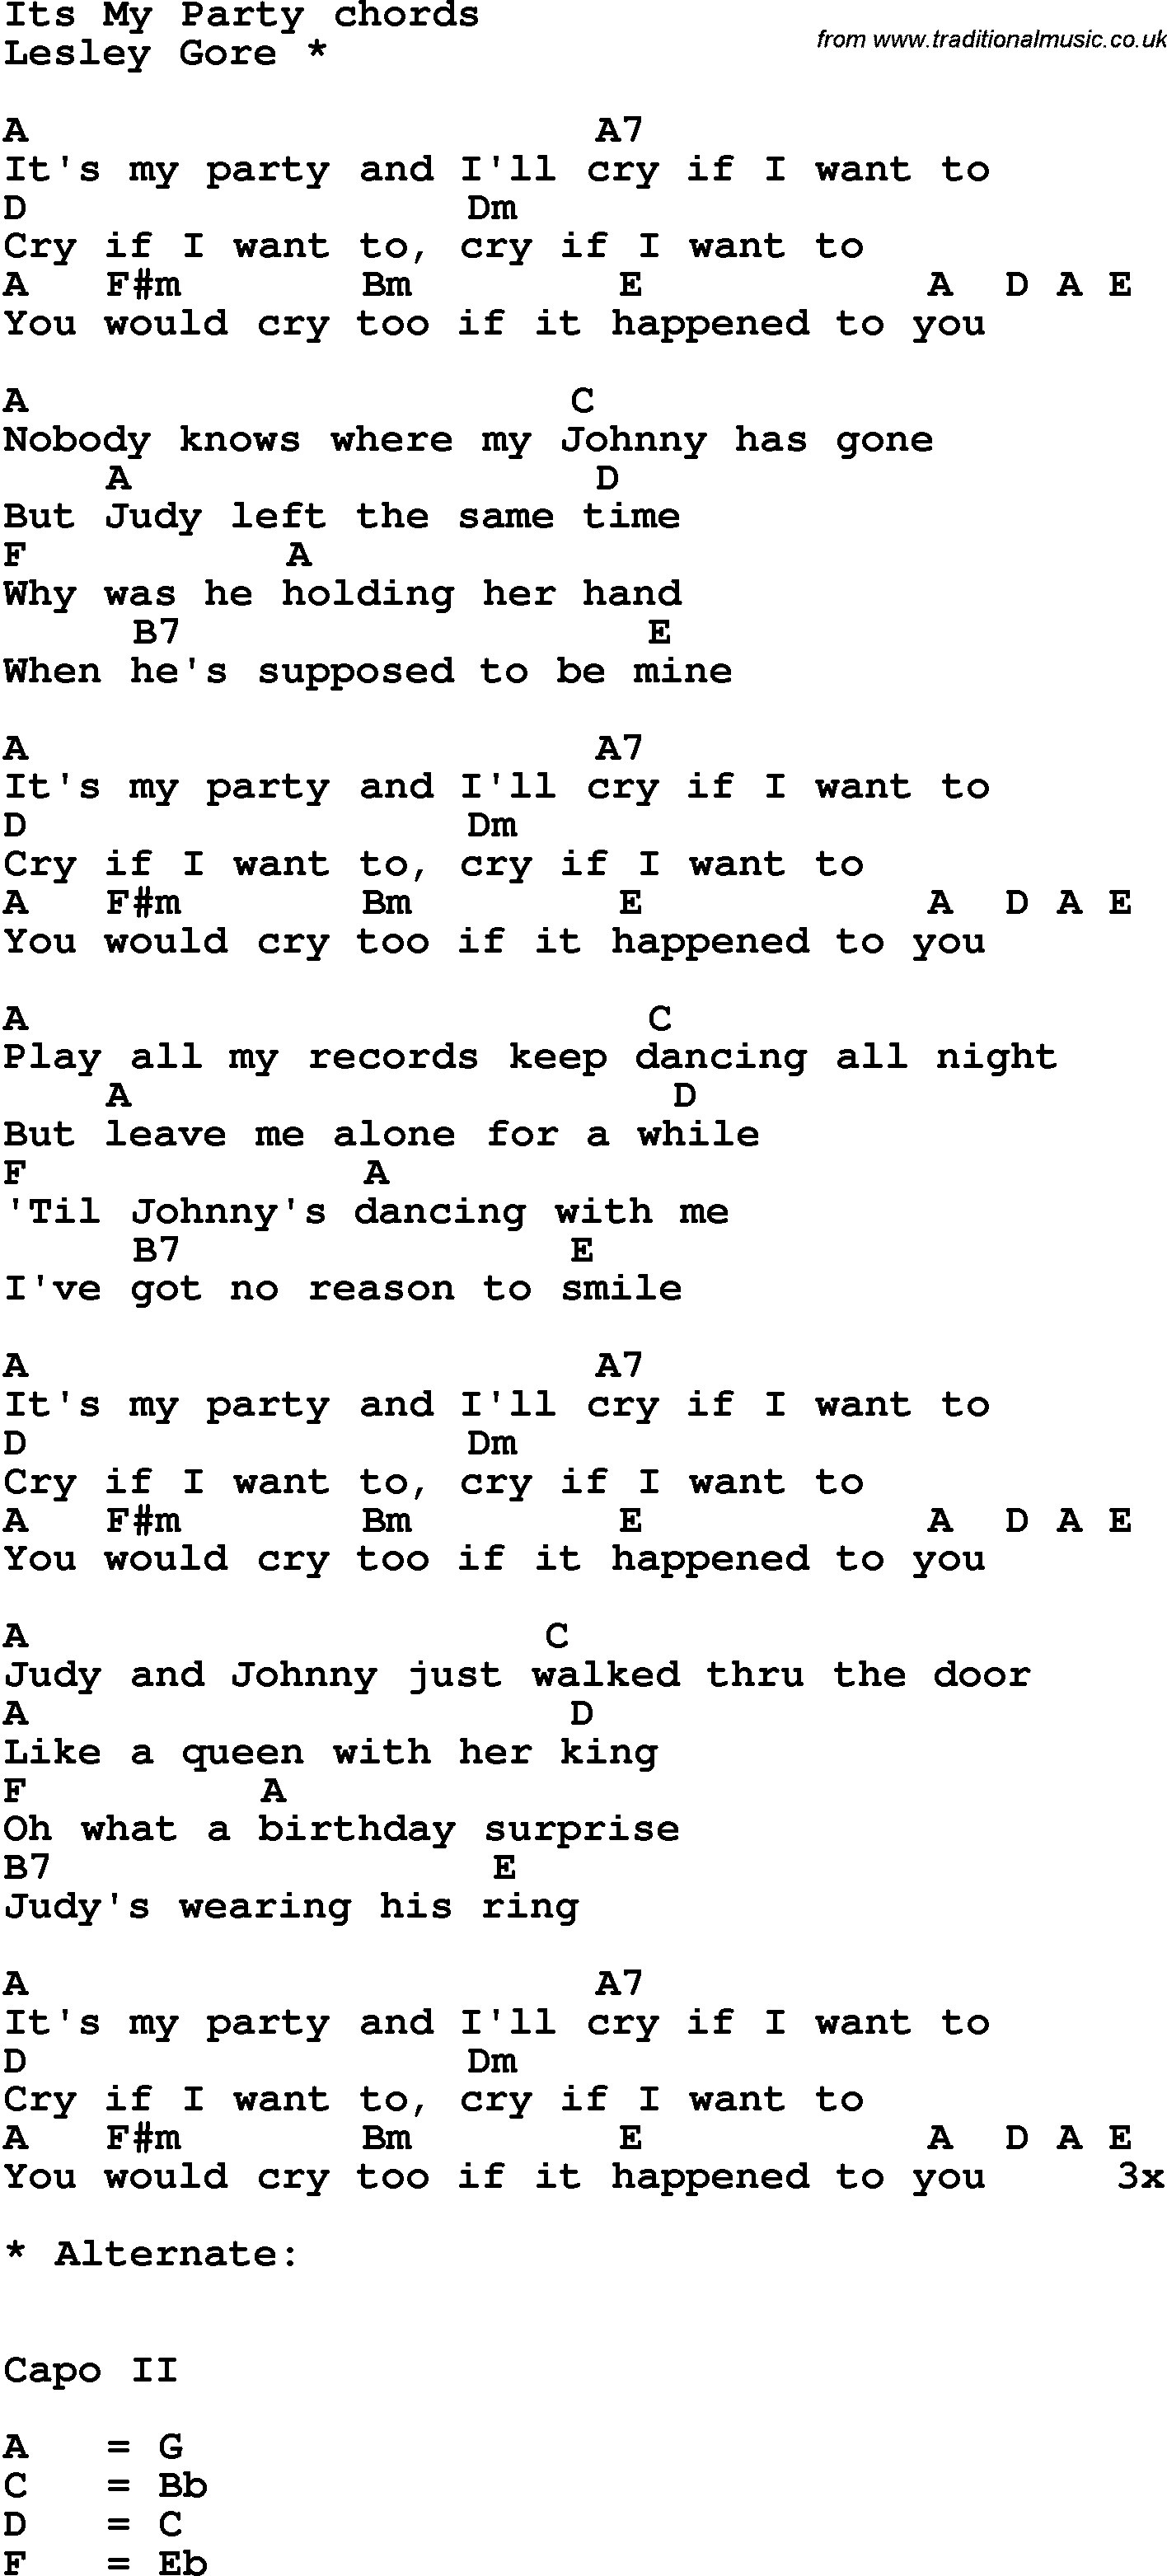 Song Lyrics with guitar chords for It's My Party